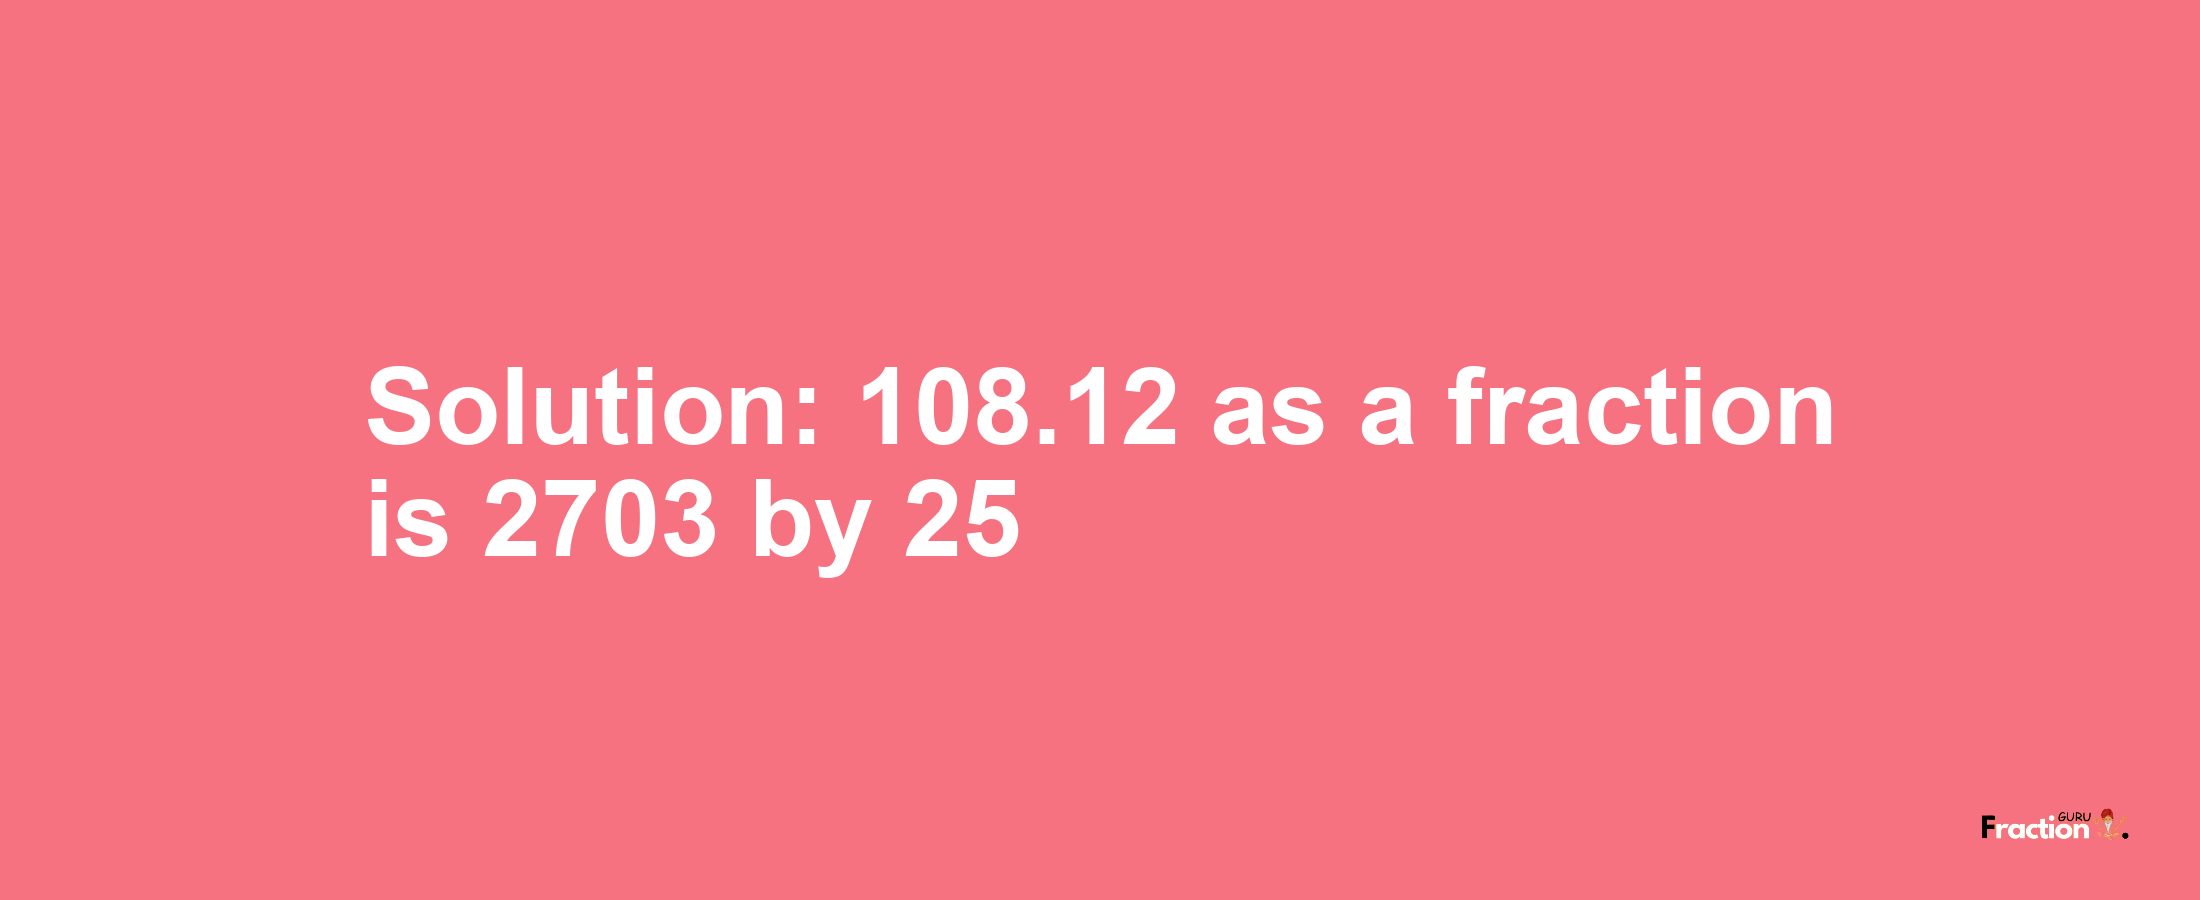 Solution:108.12 as a fraction is 2703/25